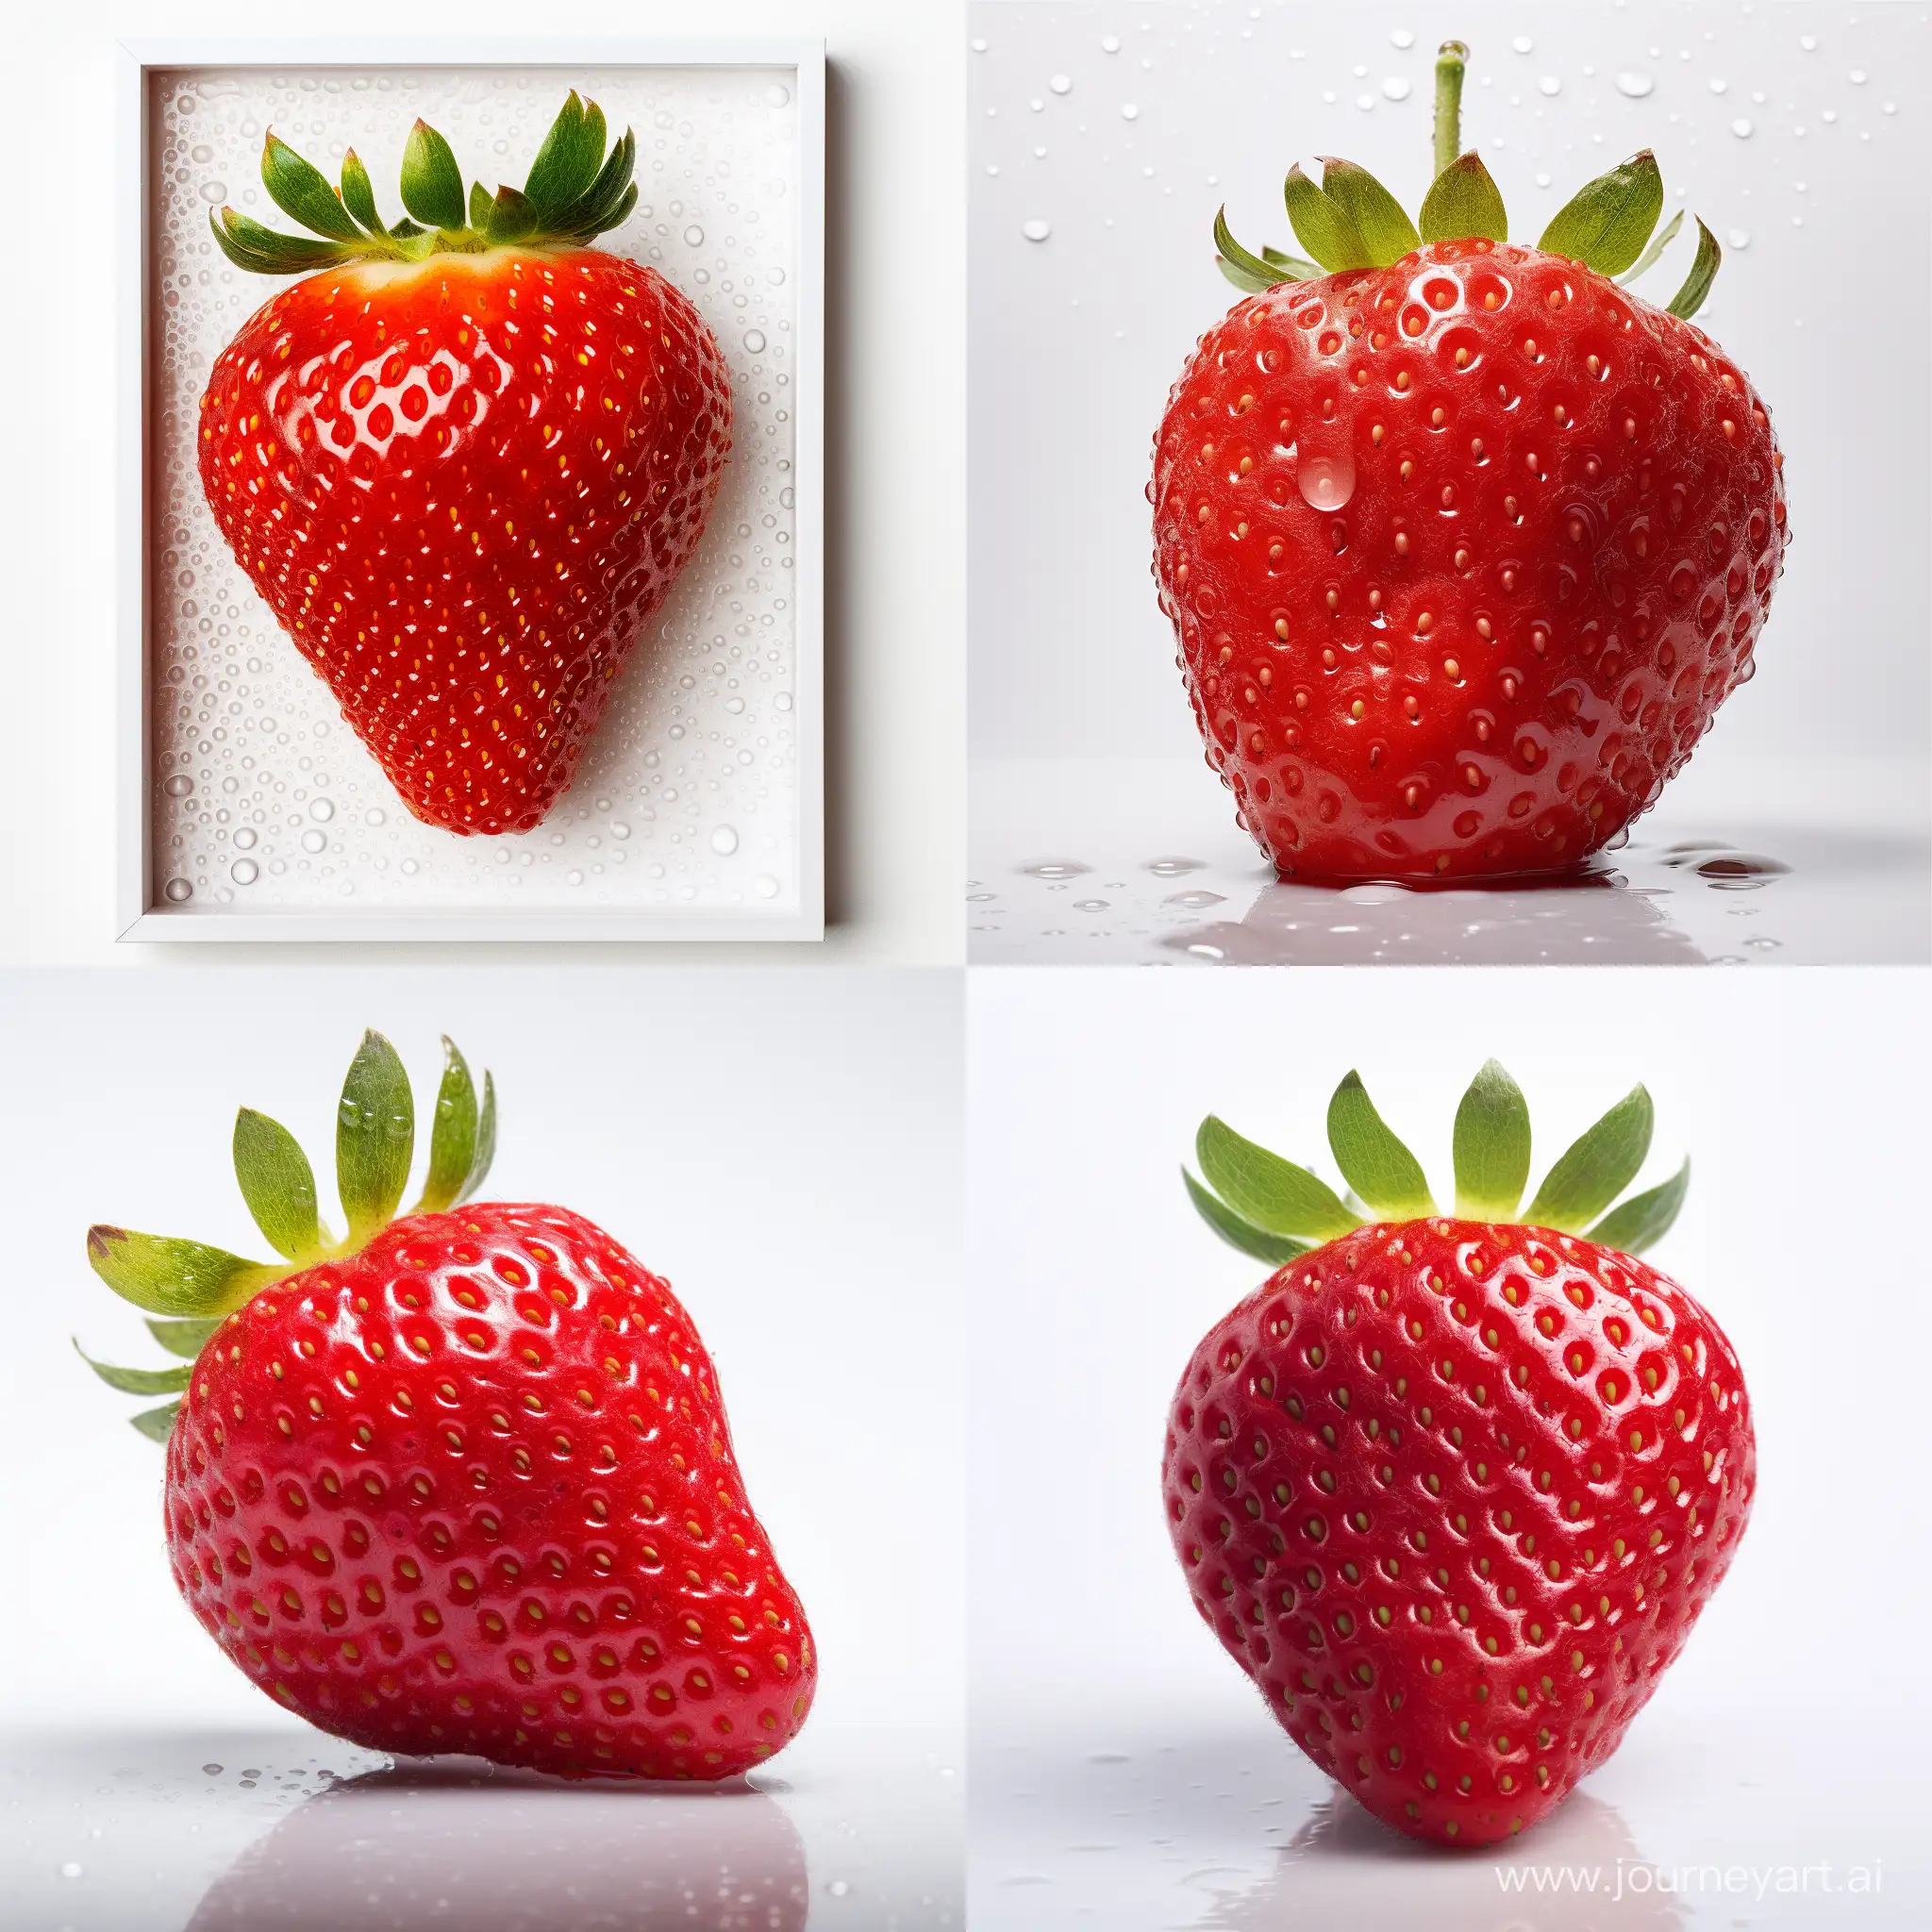 Vibrant-Strawberry-on-Clean-White-Background